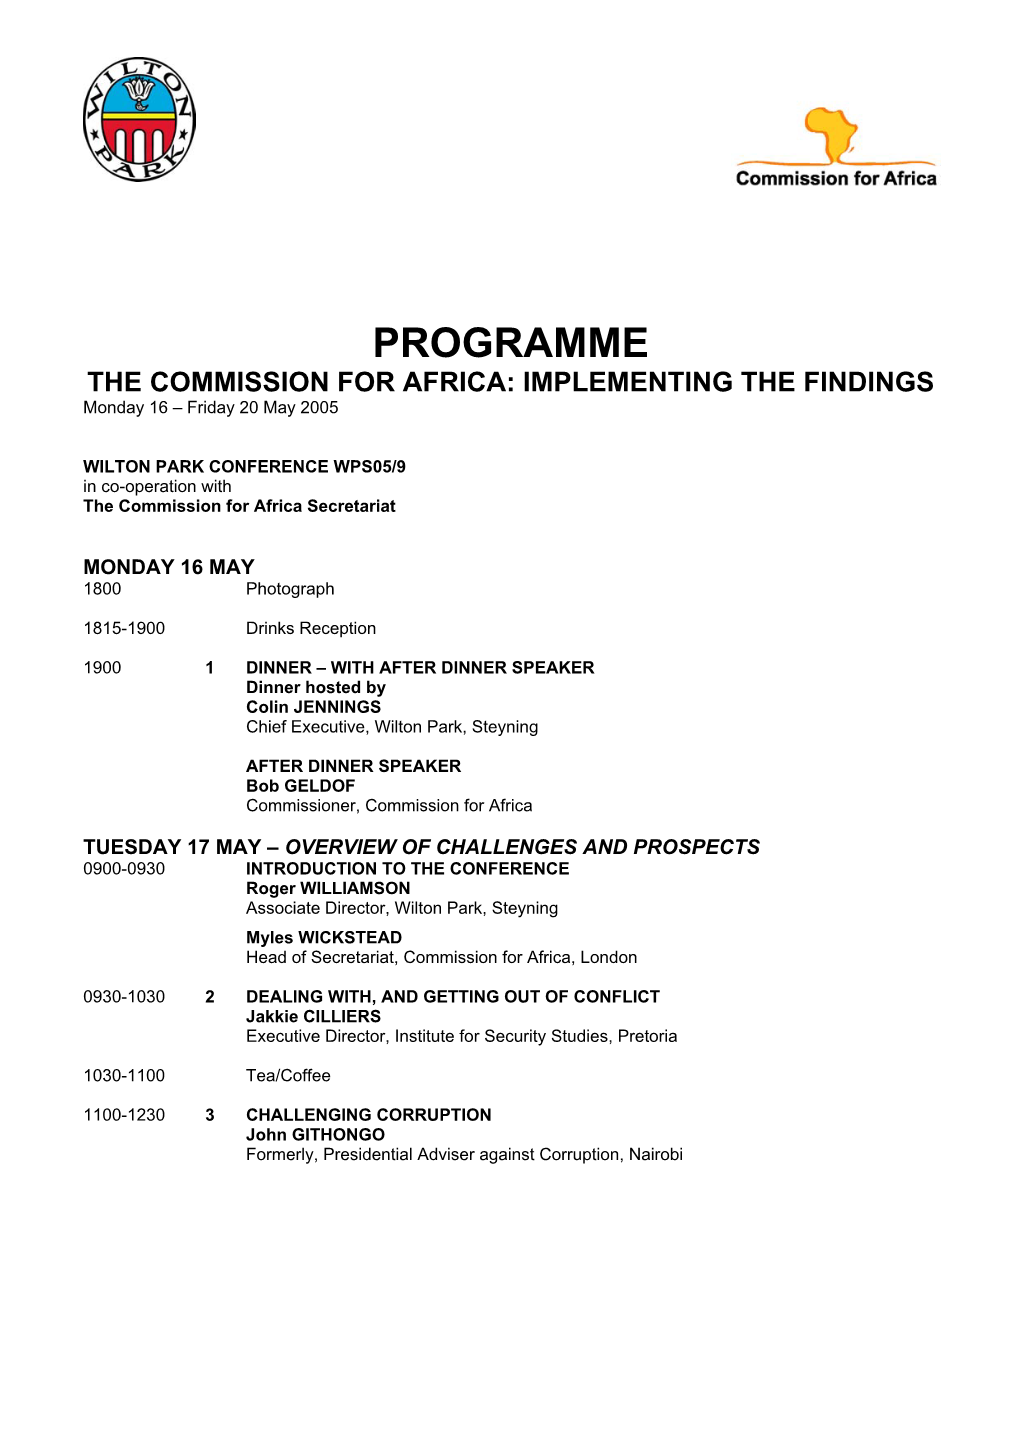 PROGRAMME the COMMISSION for AFRICA: IMPLEMENTING the FINDINGS Monday 16 – Friday 20 May 2005